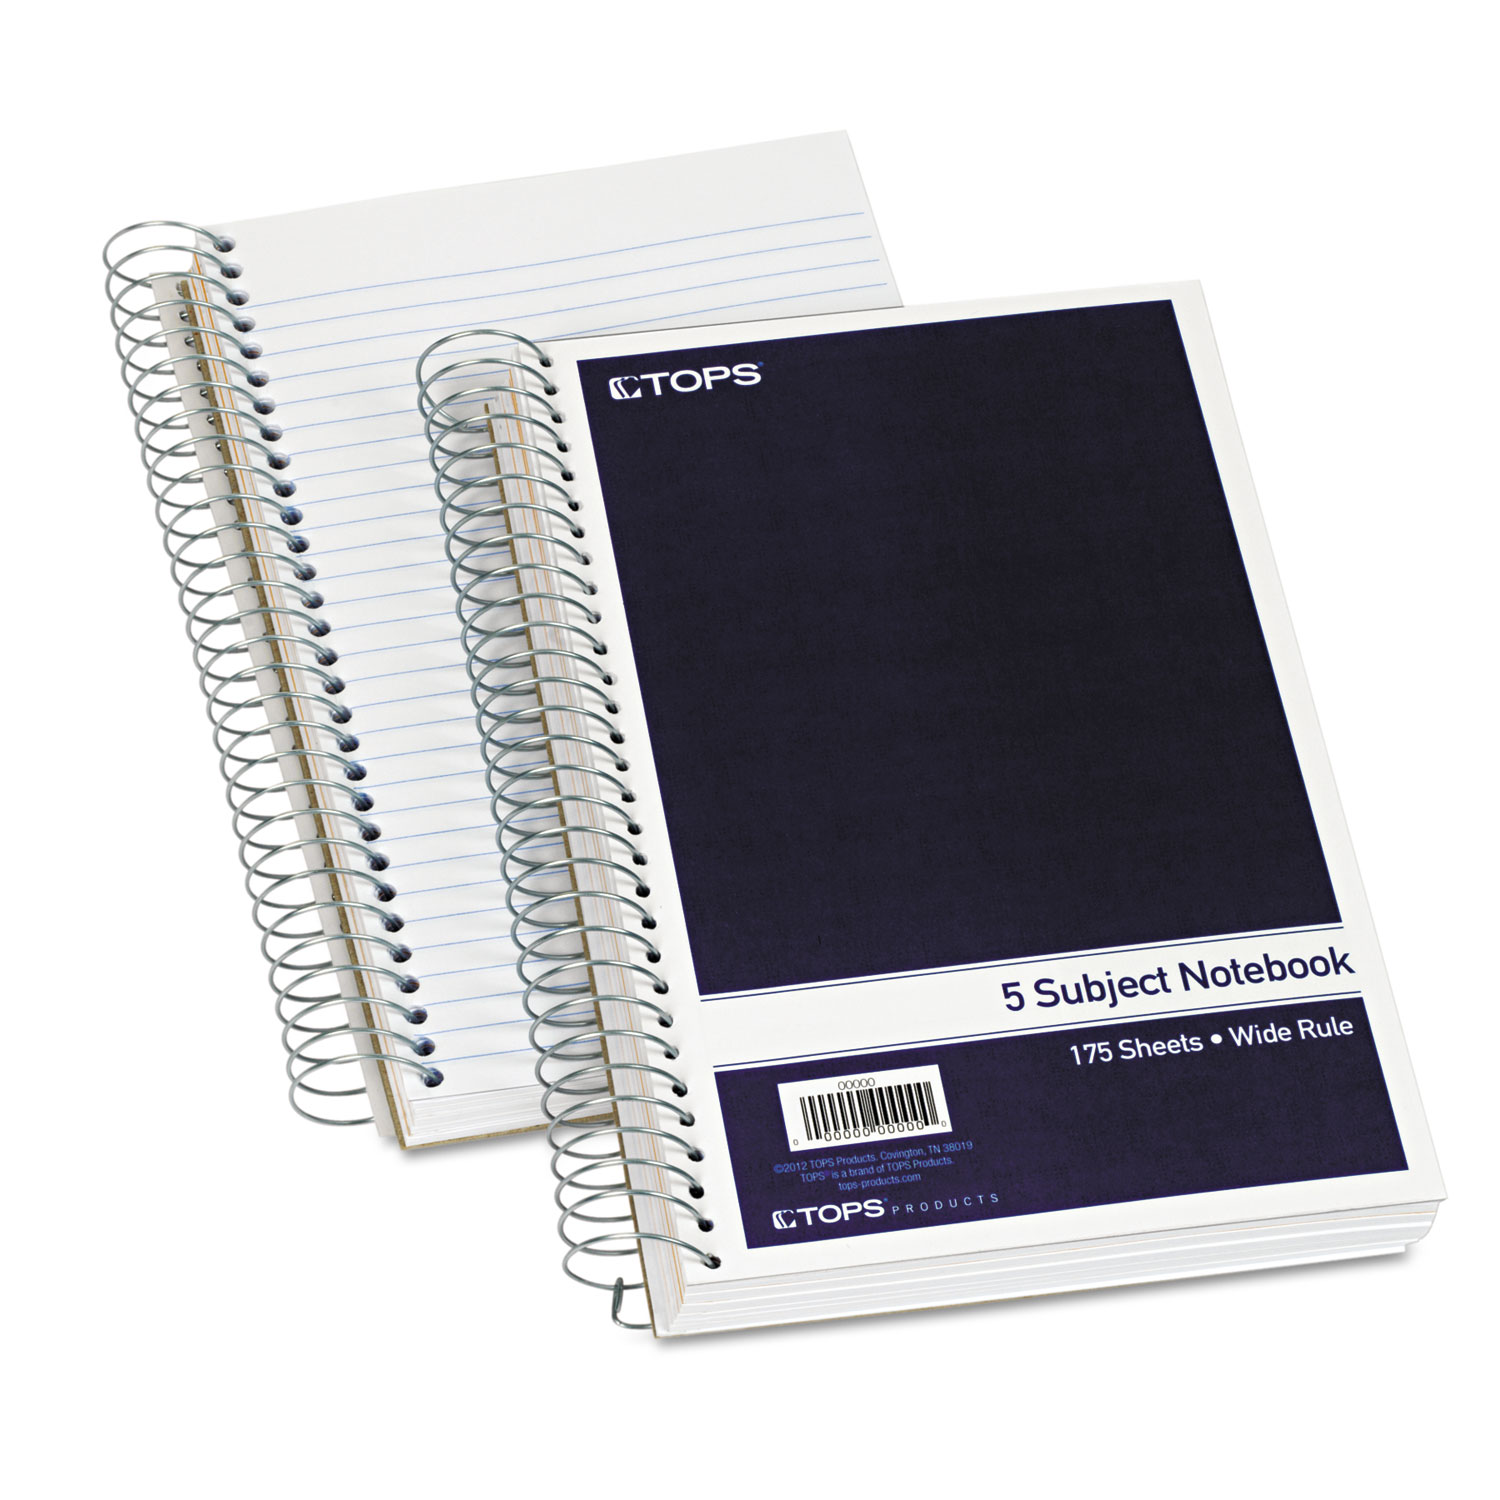 TOPS™ Wirebound Five-Subject Notebook, 5 Subjects, Wide/Legal Rule, Navy Cover, 9.5 x 6, 175 Sheets